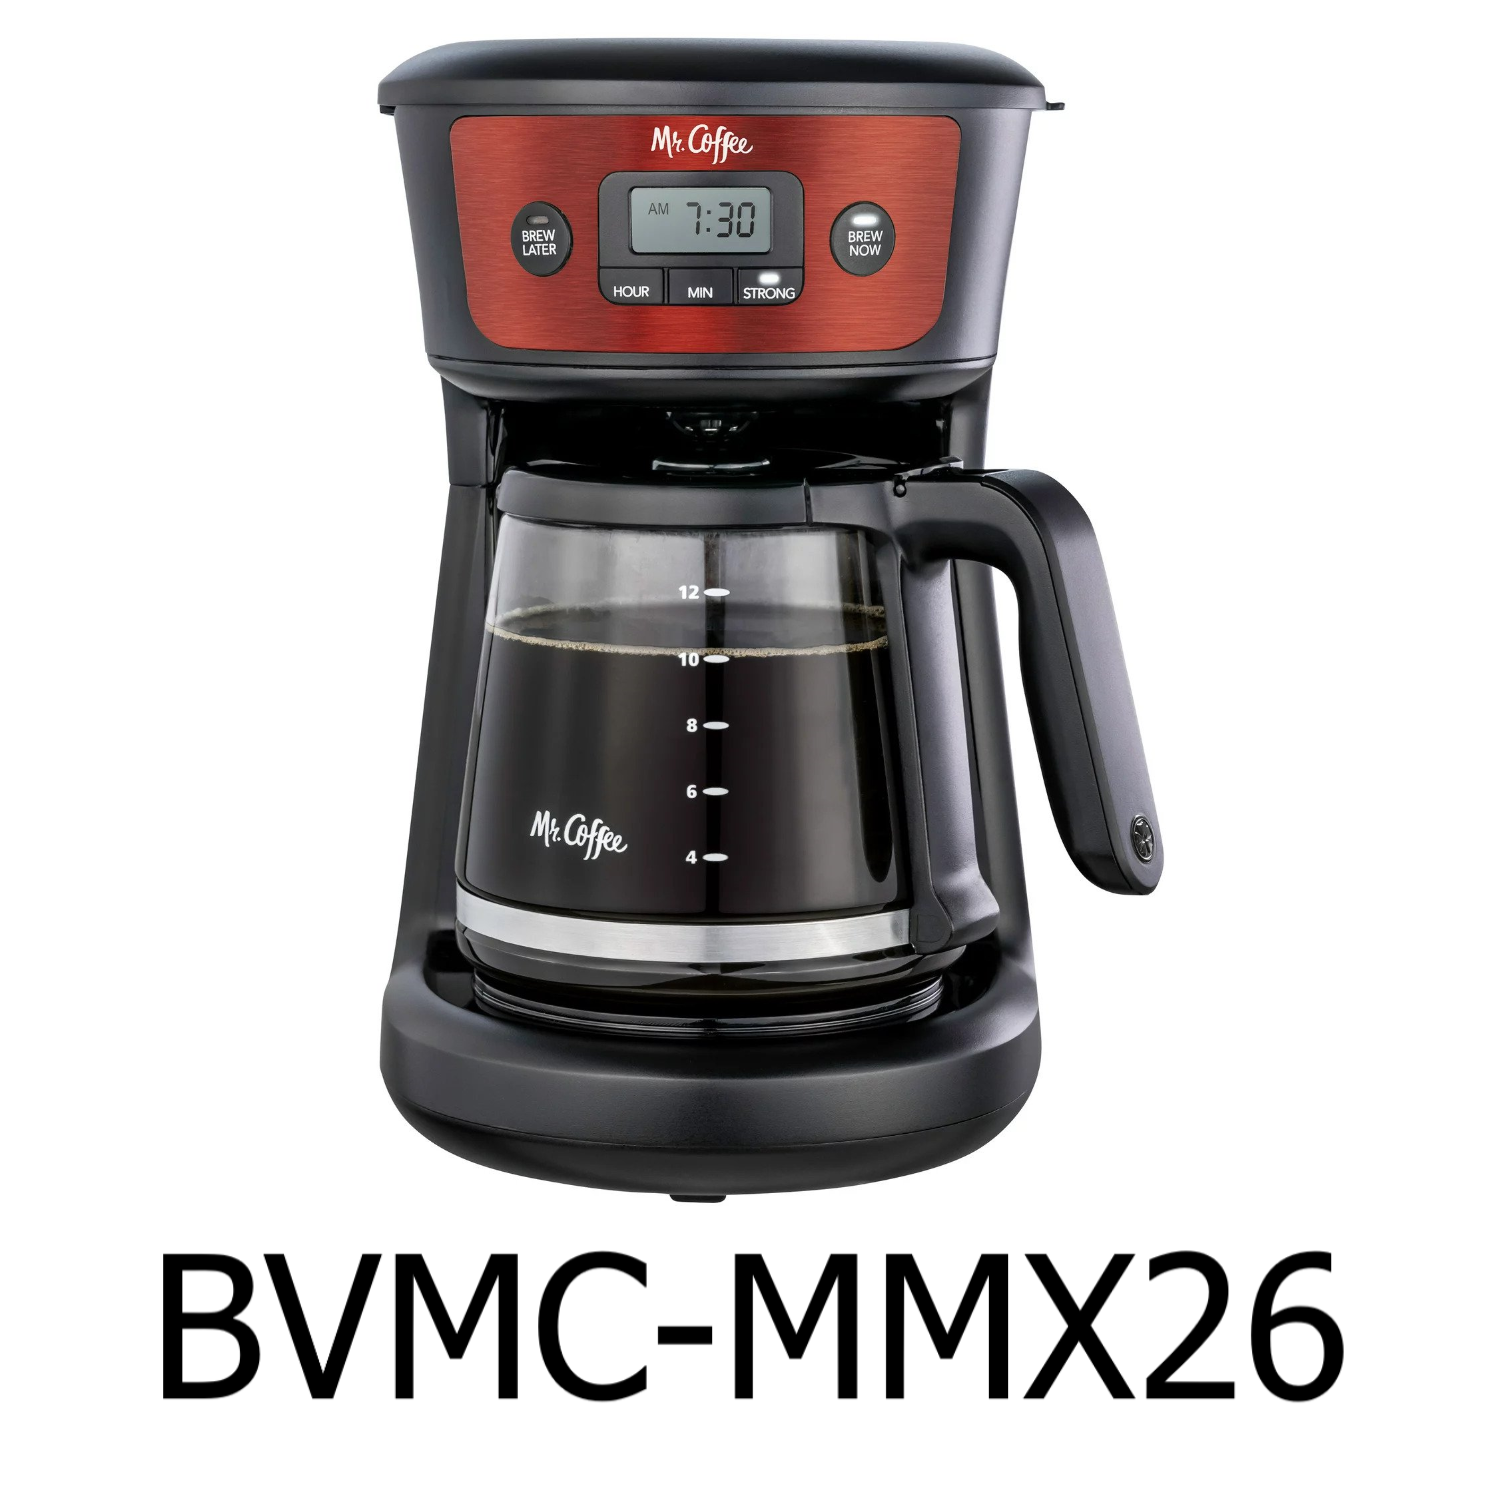 Mr. Coffee 12-Cup Programmable Drip Coffee Maker with Strong Brew, Silver